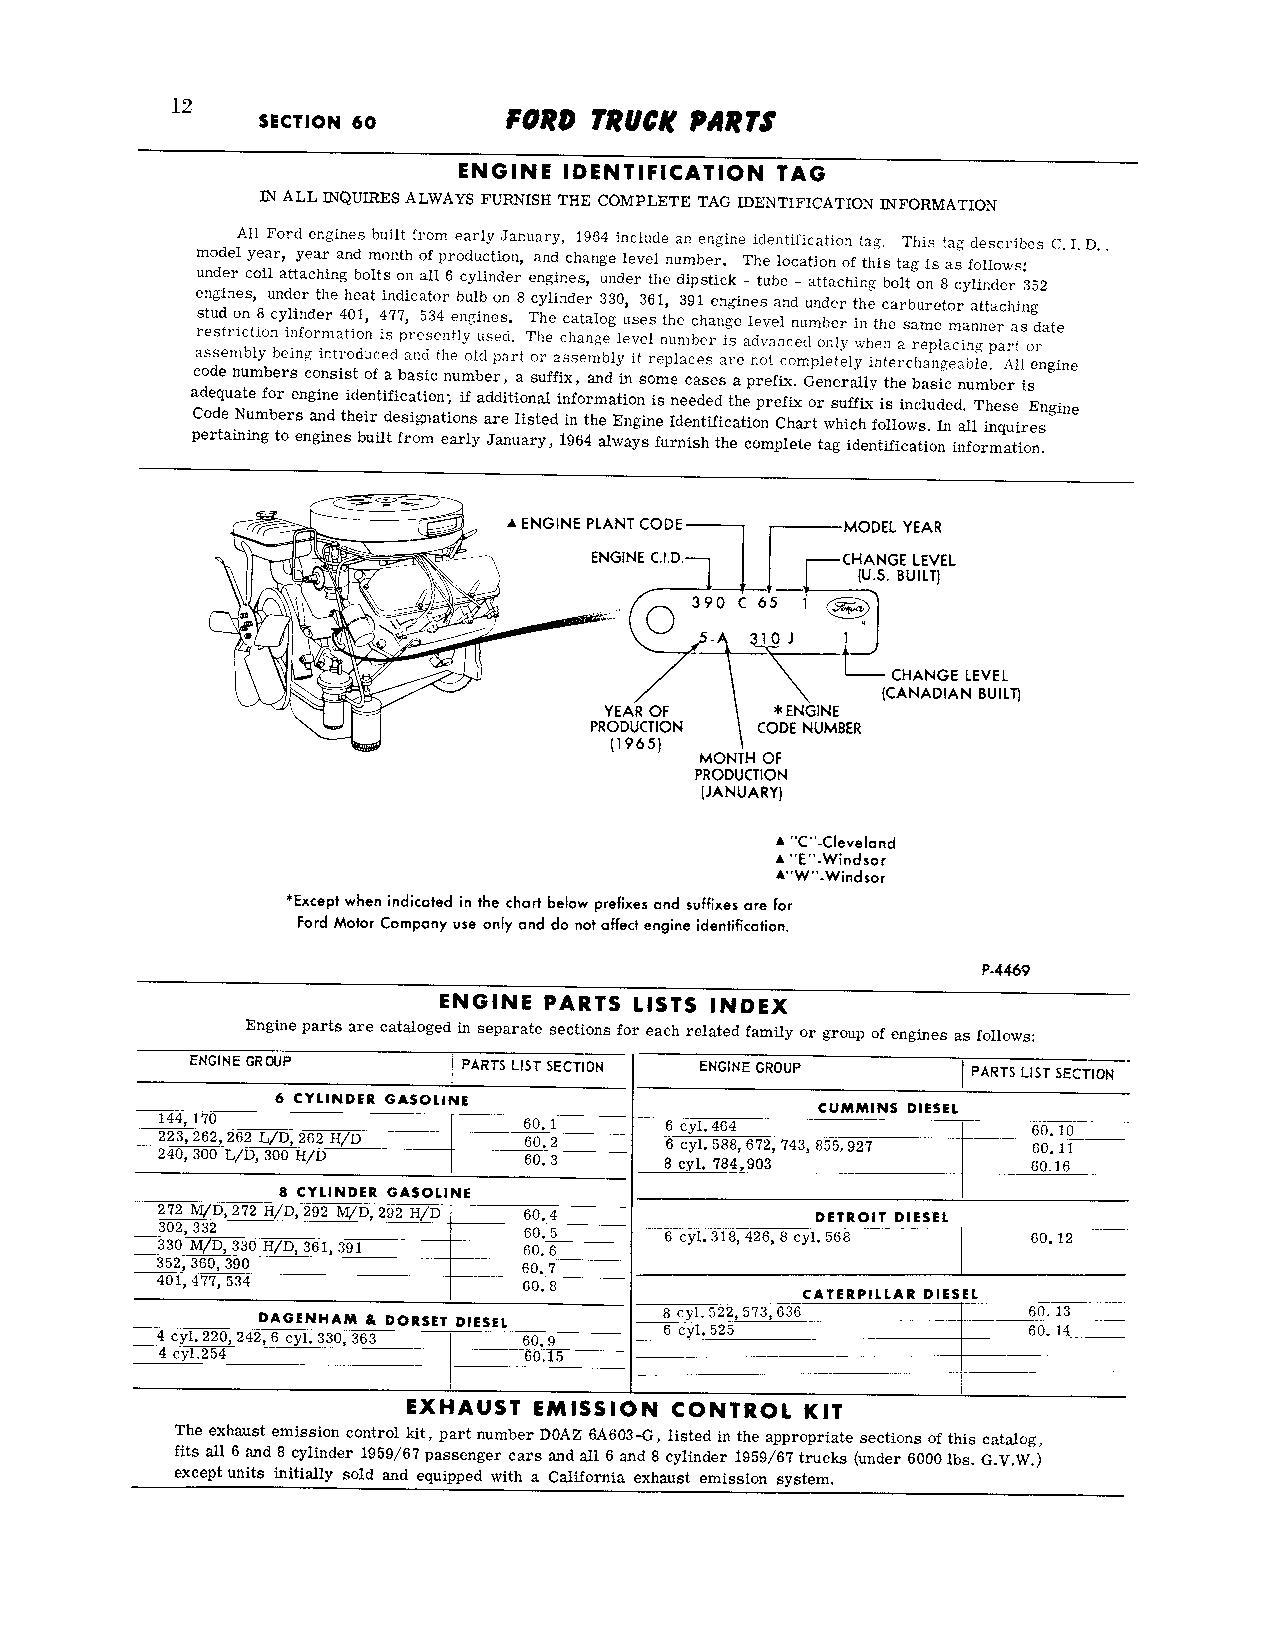 401 hp 390 ford engine codes